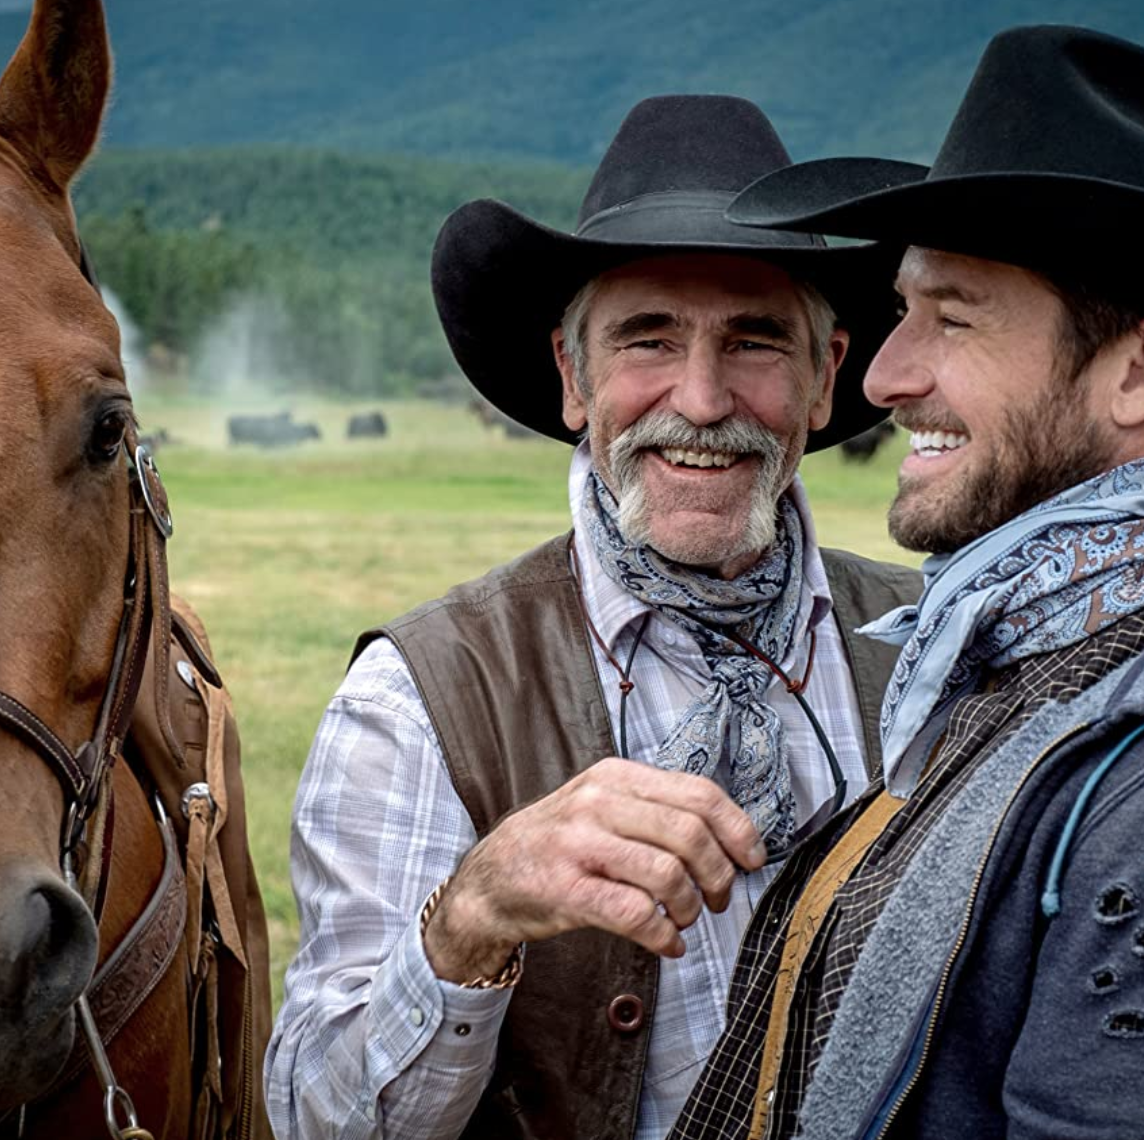 A Popular 'Yellowstone' Actor Is Refusing to Get Vaccinated. Here's Why.